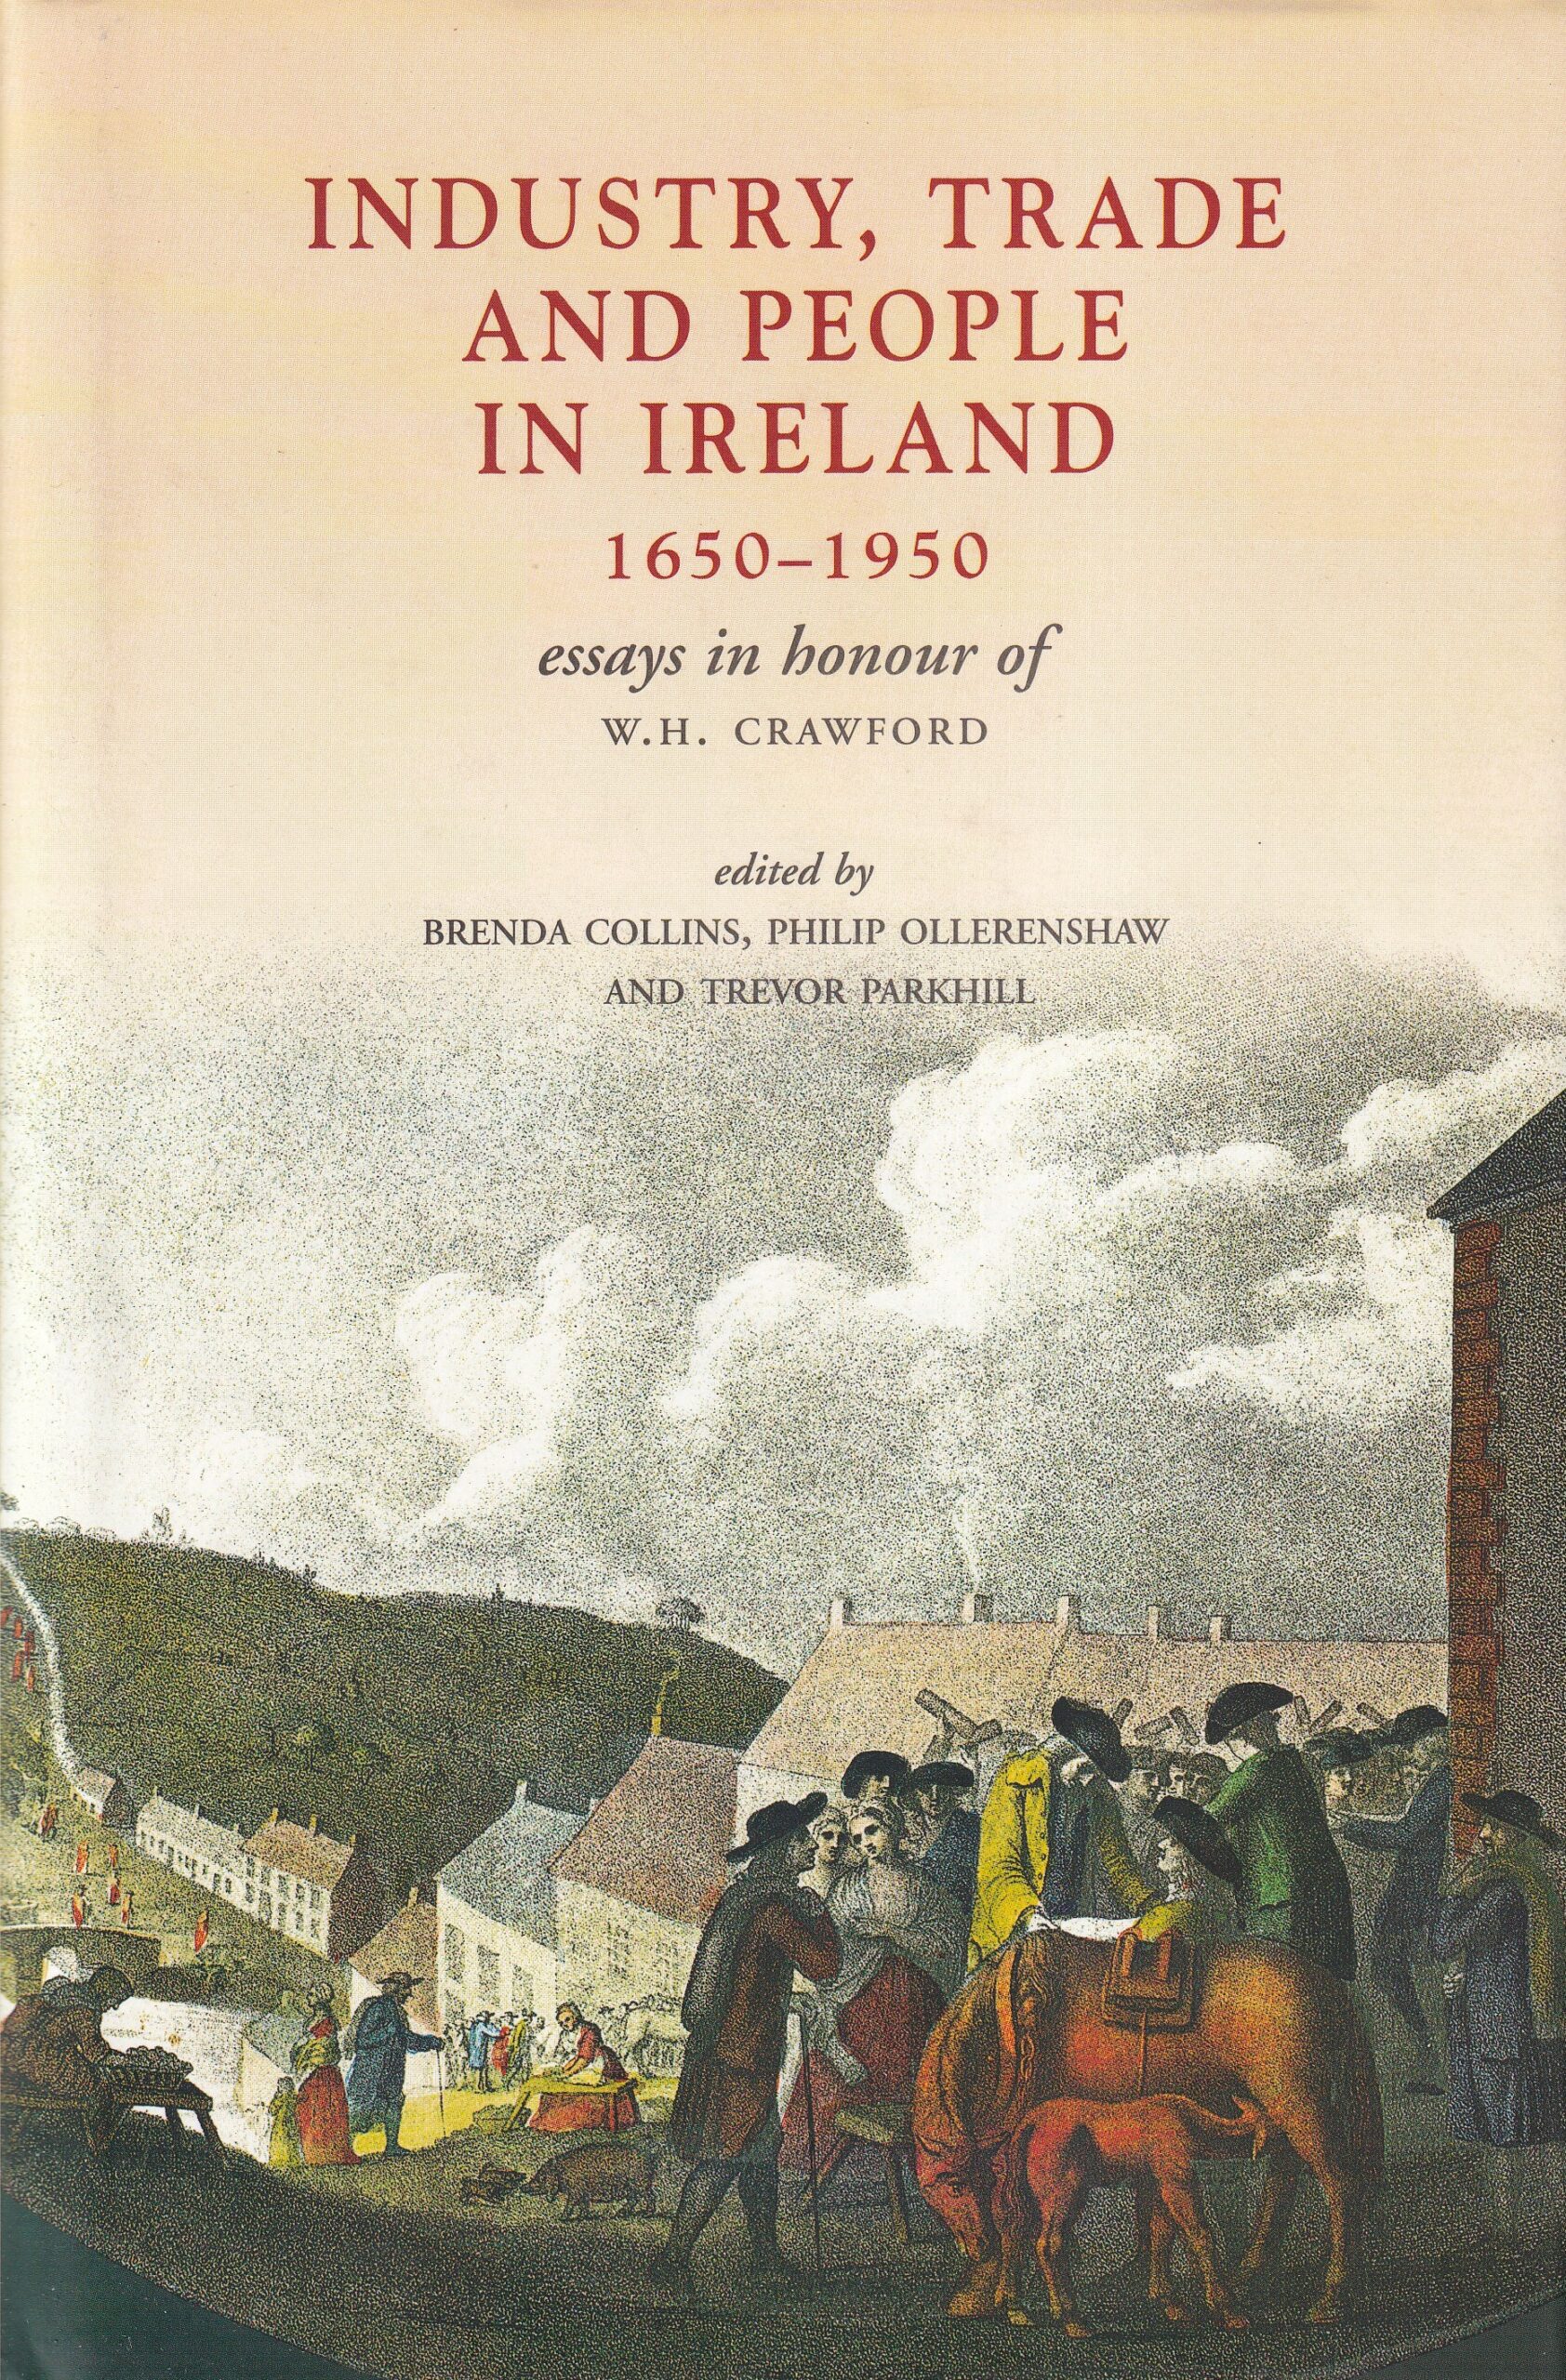 Industry, Trade, and People in Ireland 1650-1950: Essays in Honour of W.H.Crawford by Brenda Collins, Philip Ollerenshaw and Trevor Parkhill (eds.)